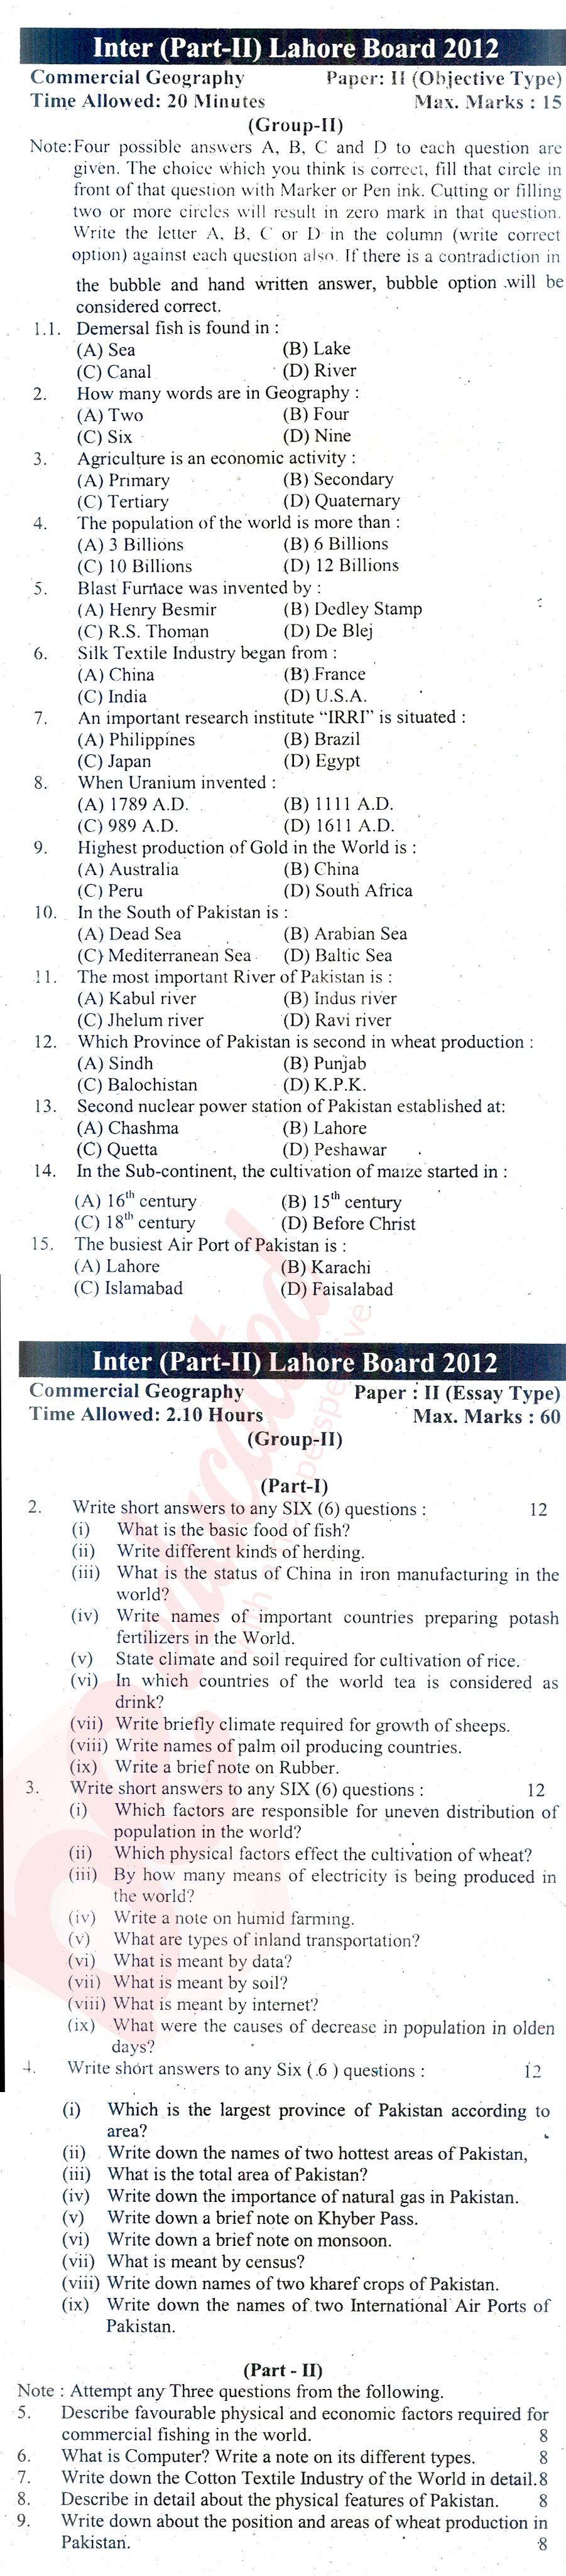 Commercial Geography ICOM Part 2 Past Paper Group 2 BISE Lahore 2012